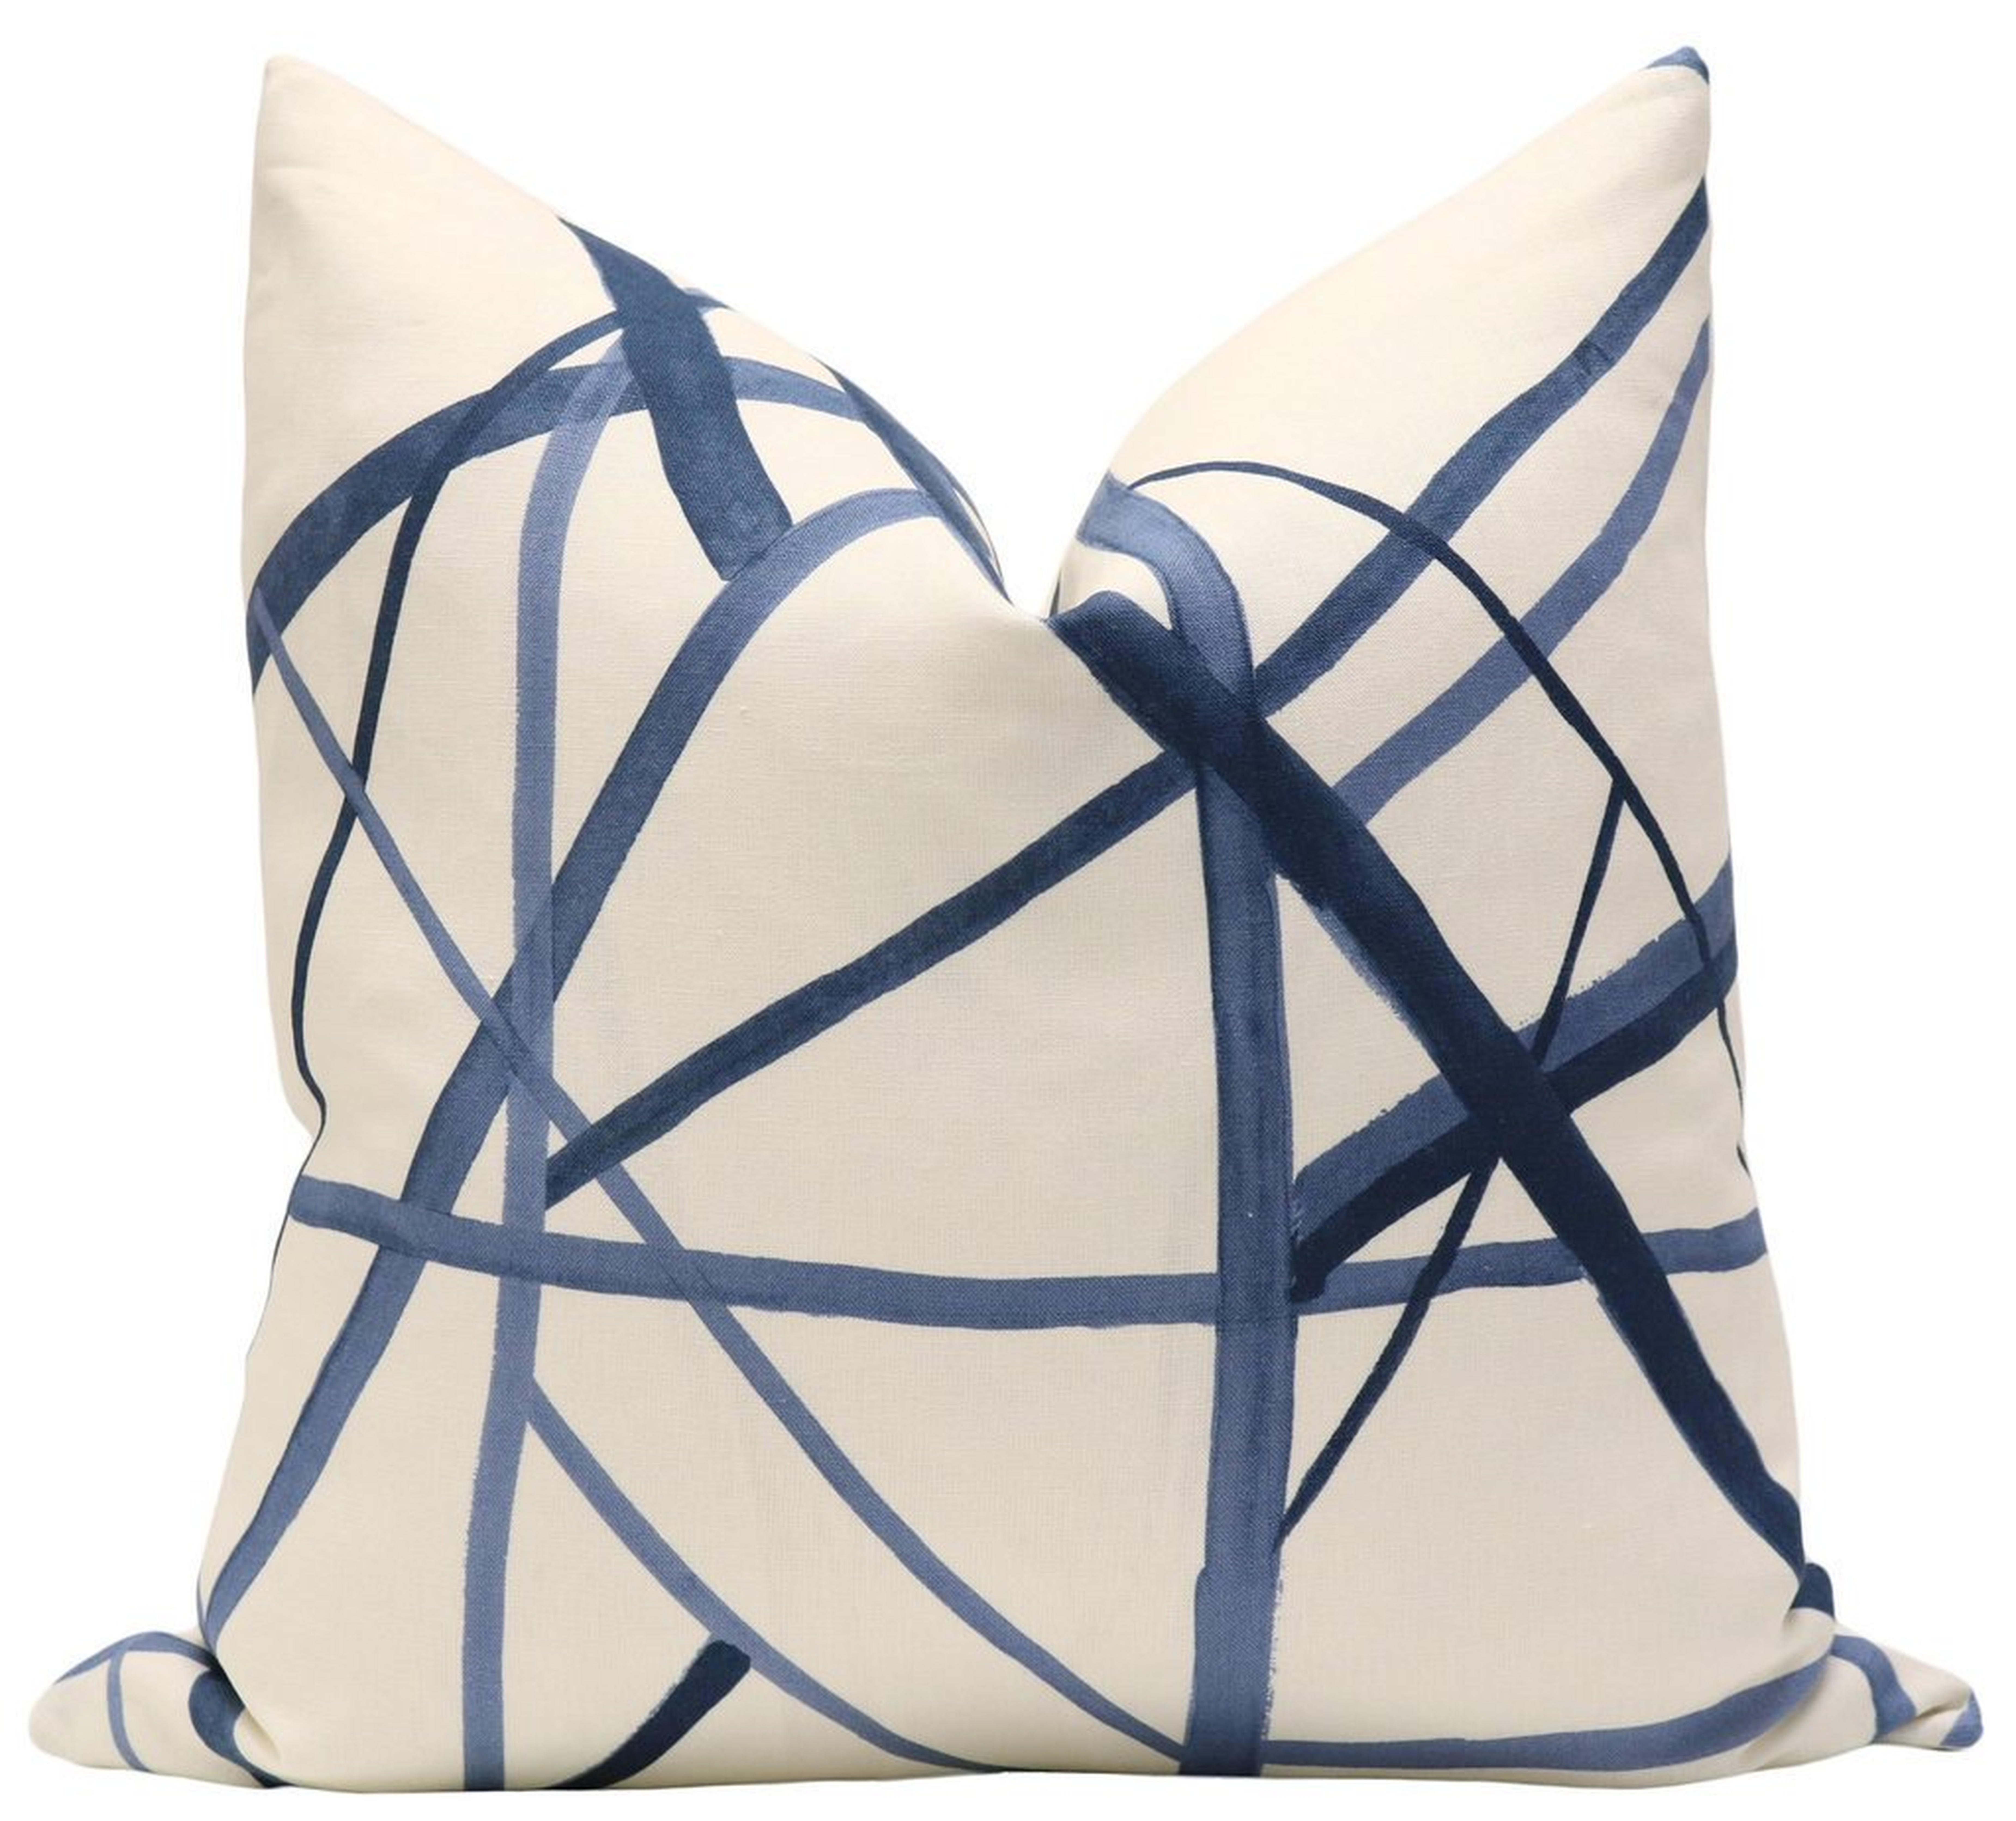 Channels Pillow Cover, Periwinkle, 20" x 20" - Little Design Company